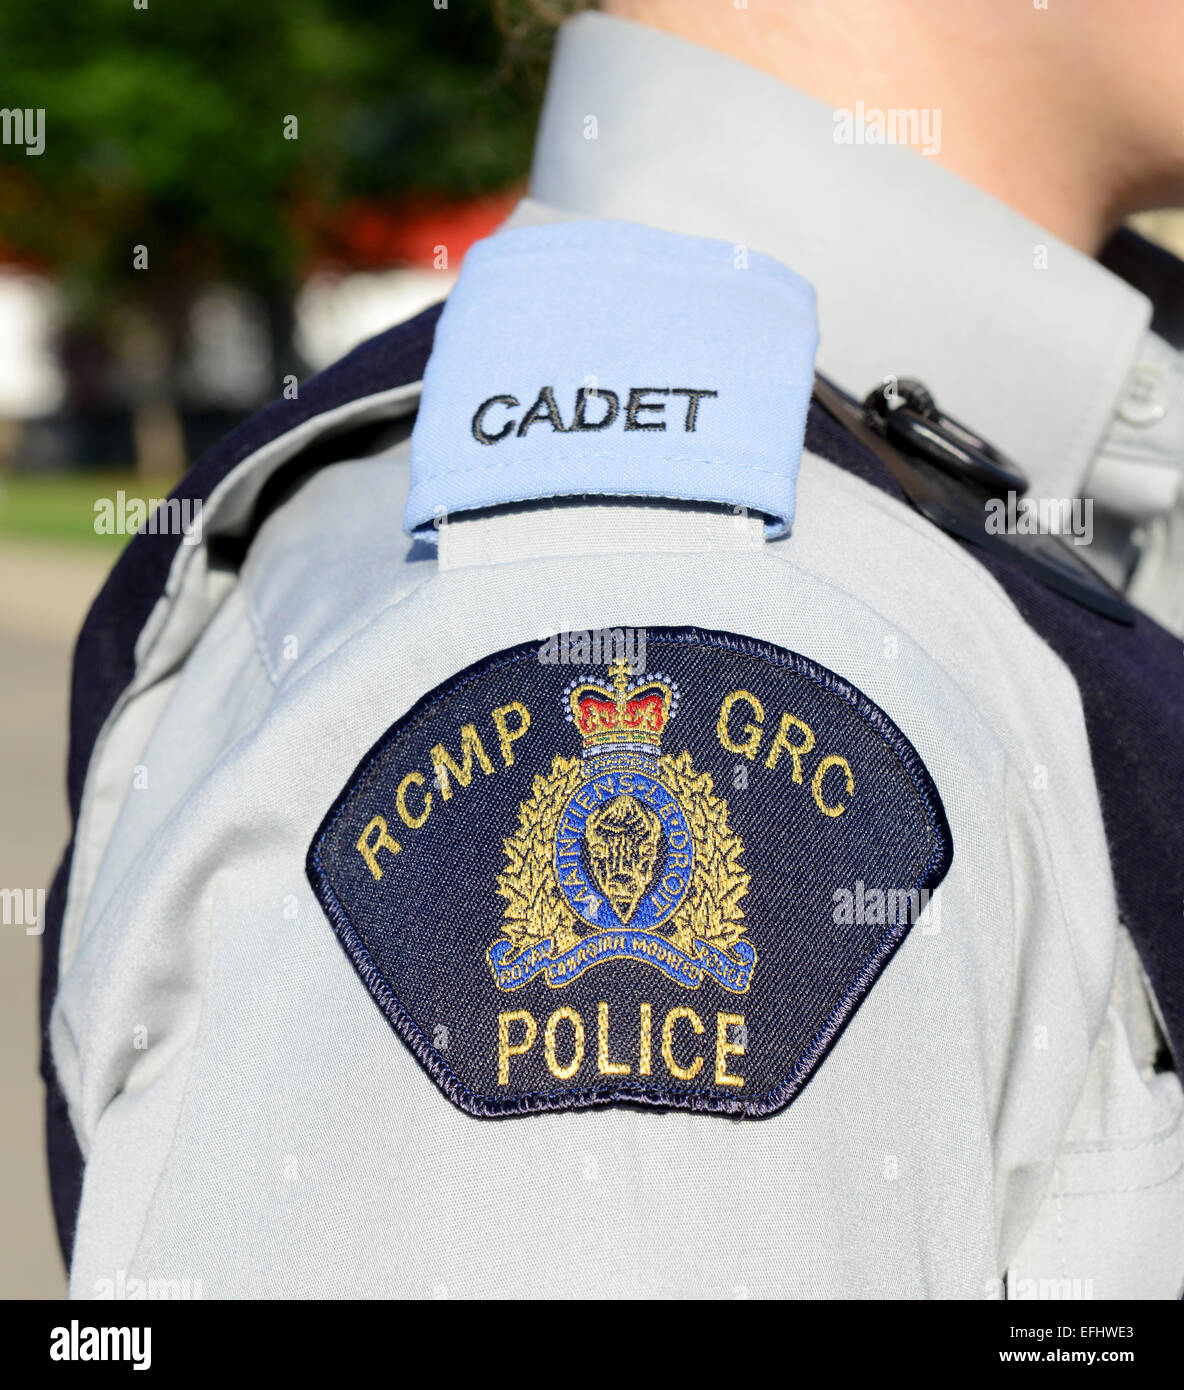 “Royal Canadian Mounted Police” Cadet, RCMP Police Mounties cadet badge, Canada Stock Photo